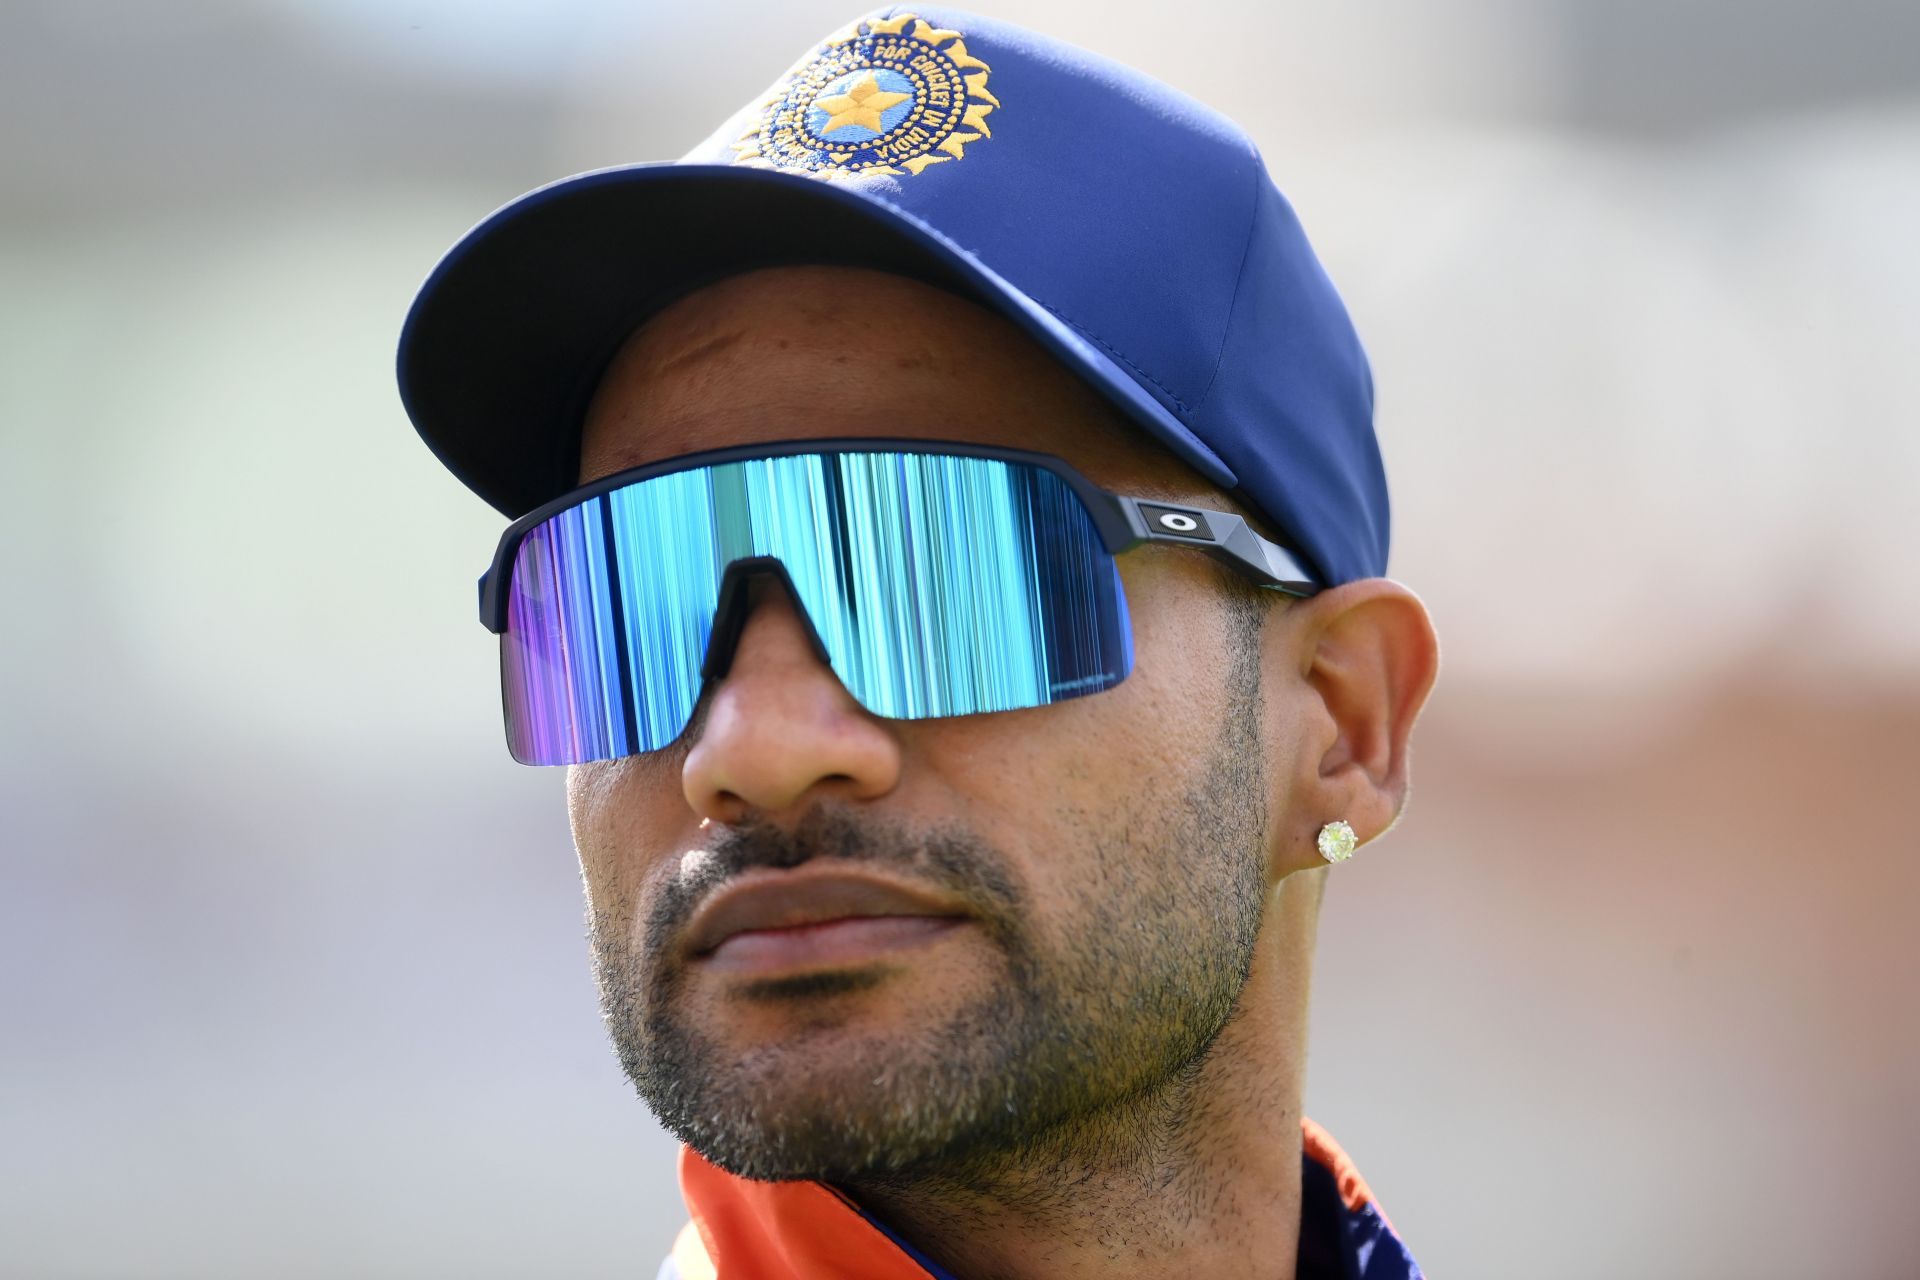 Shikhar Dhawan will lead India in the three-match ODI series against West Indies.